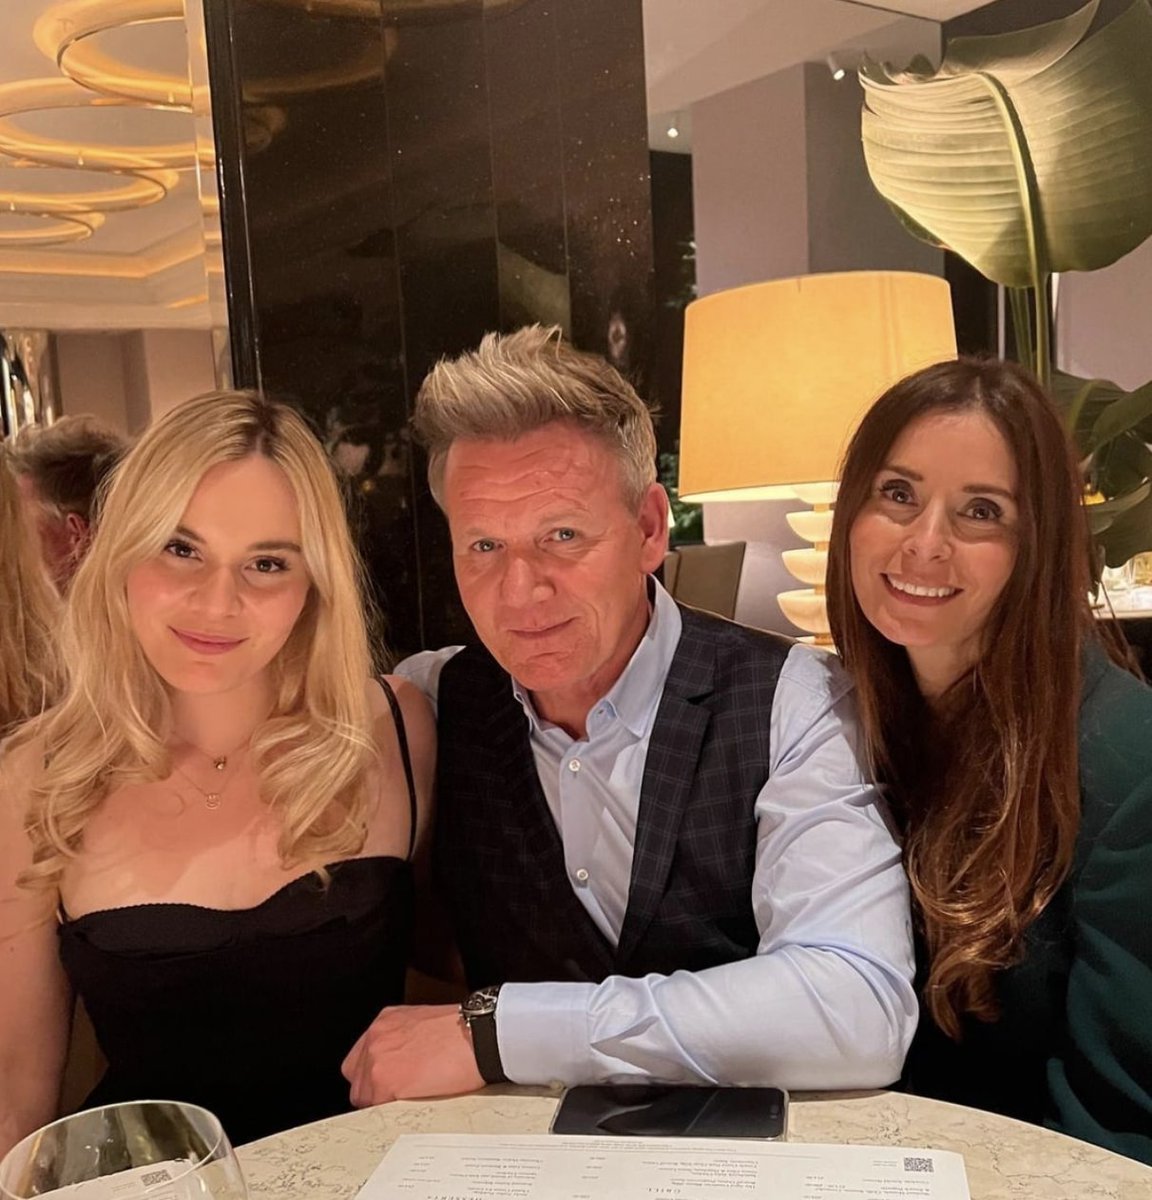 Gordon Ramsay poses with 'beautiful' wife and daughter as they lunch at his restaurant

https://t.co/yVwFSYrka1 https://t.co/hs5IYDY06F